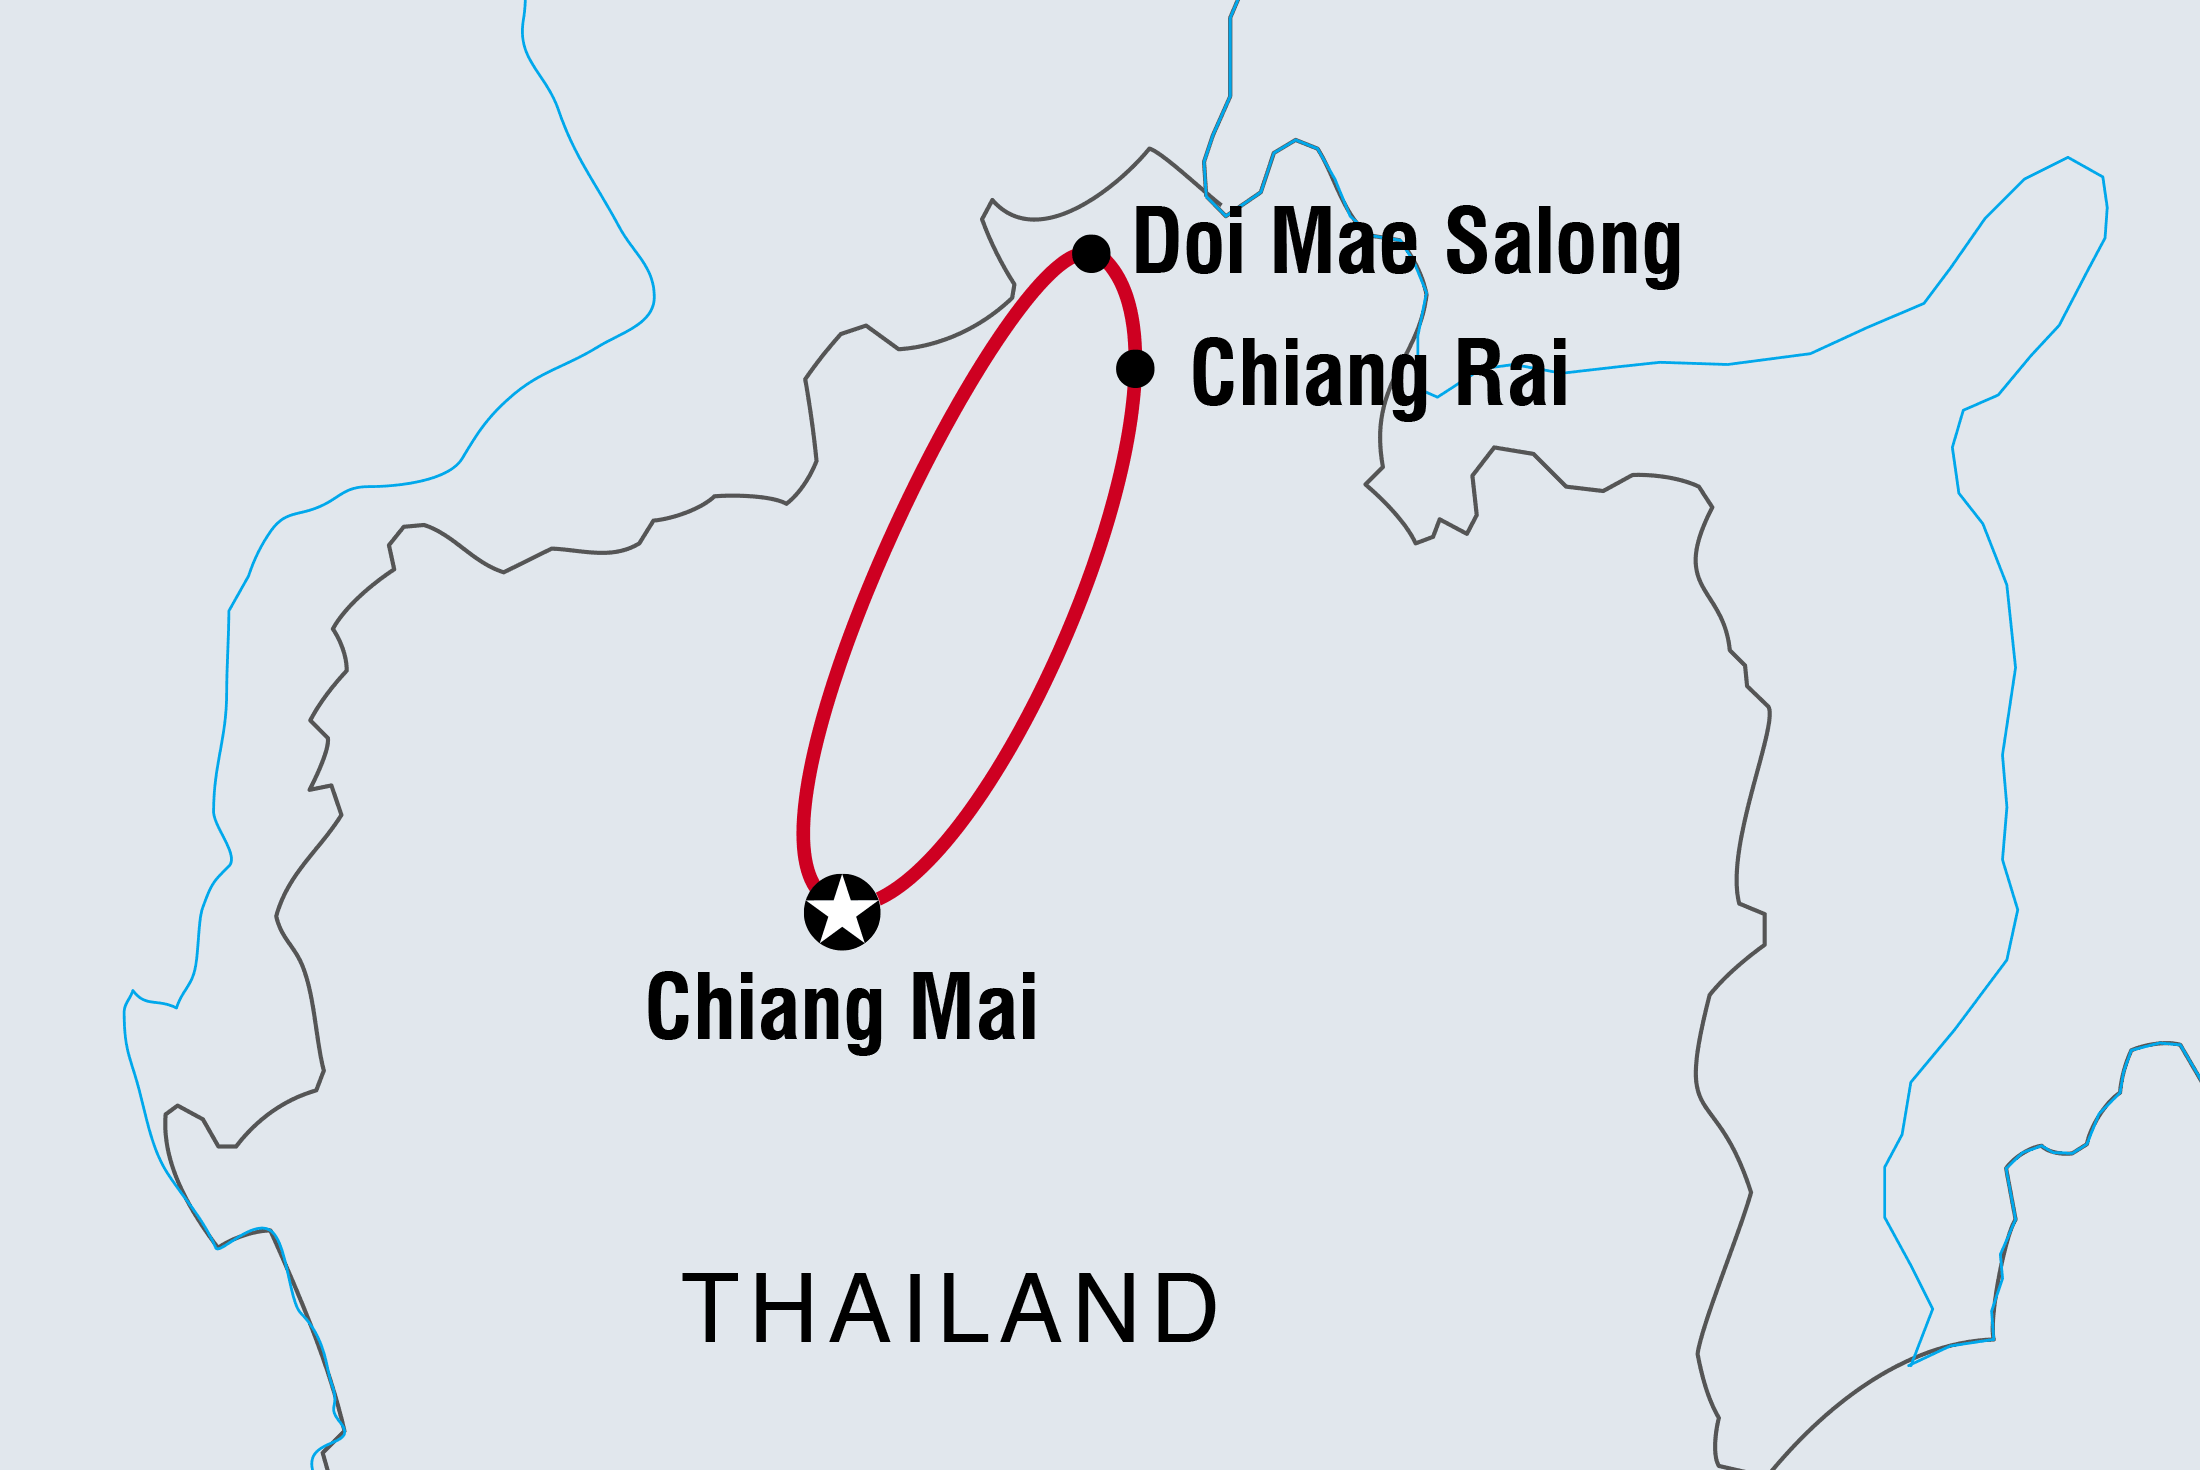 Map of Chiang Mai & Golden Triangle including Thailand